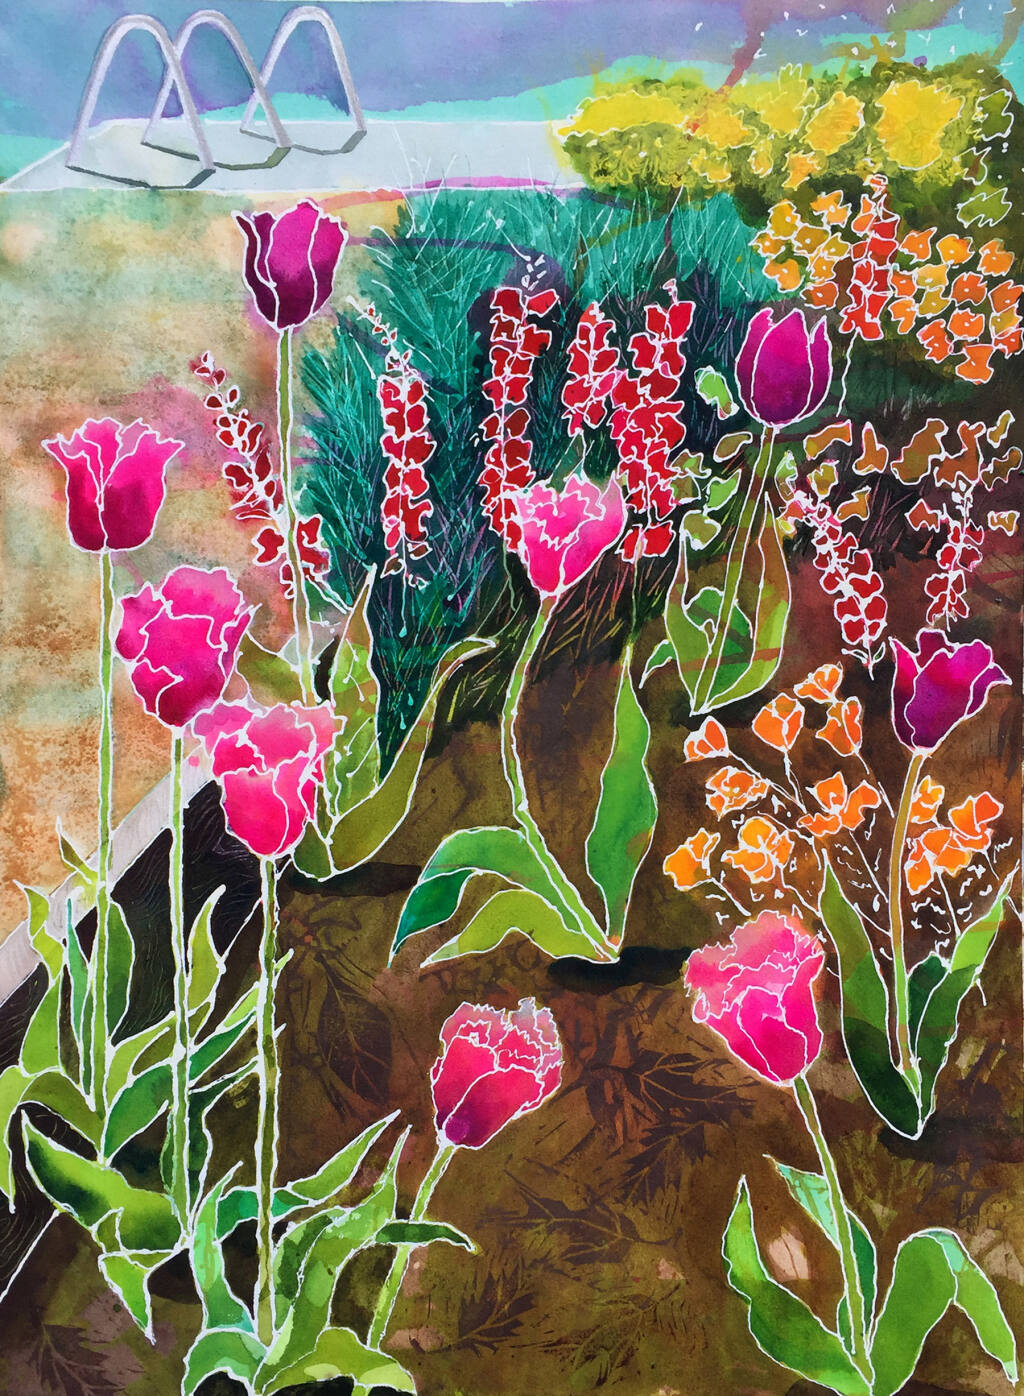 “Tulips with Bike Rack” by Marilyn J. Dizikes, who works in acrylics, watercolor, printmaking and clay. (Petaluma Arts Association)